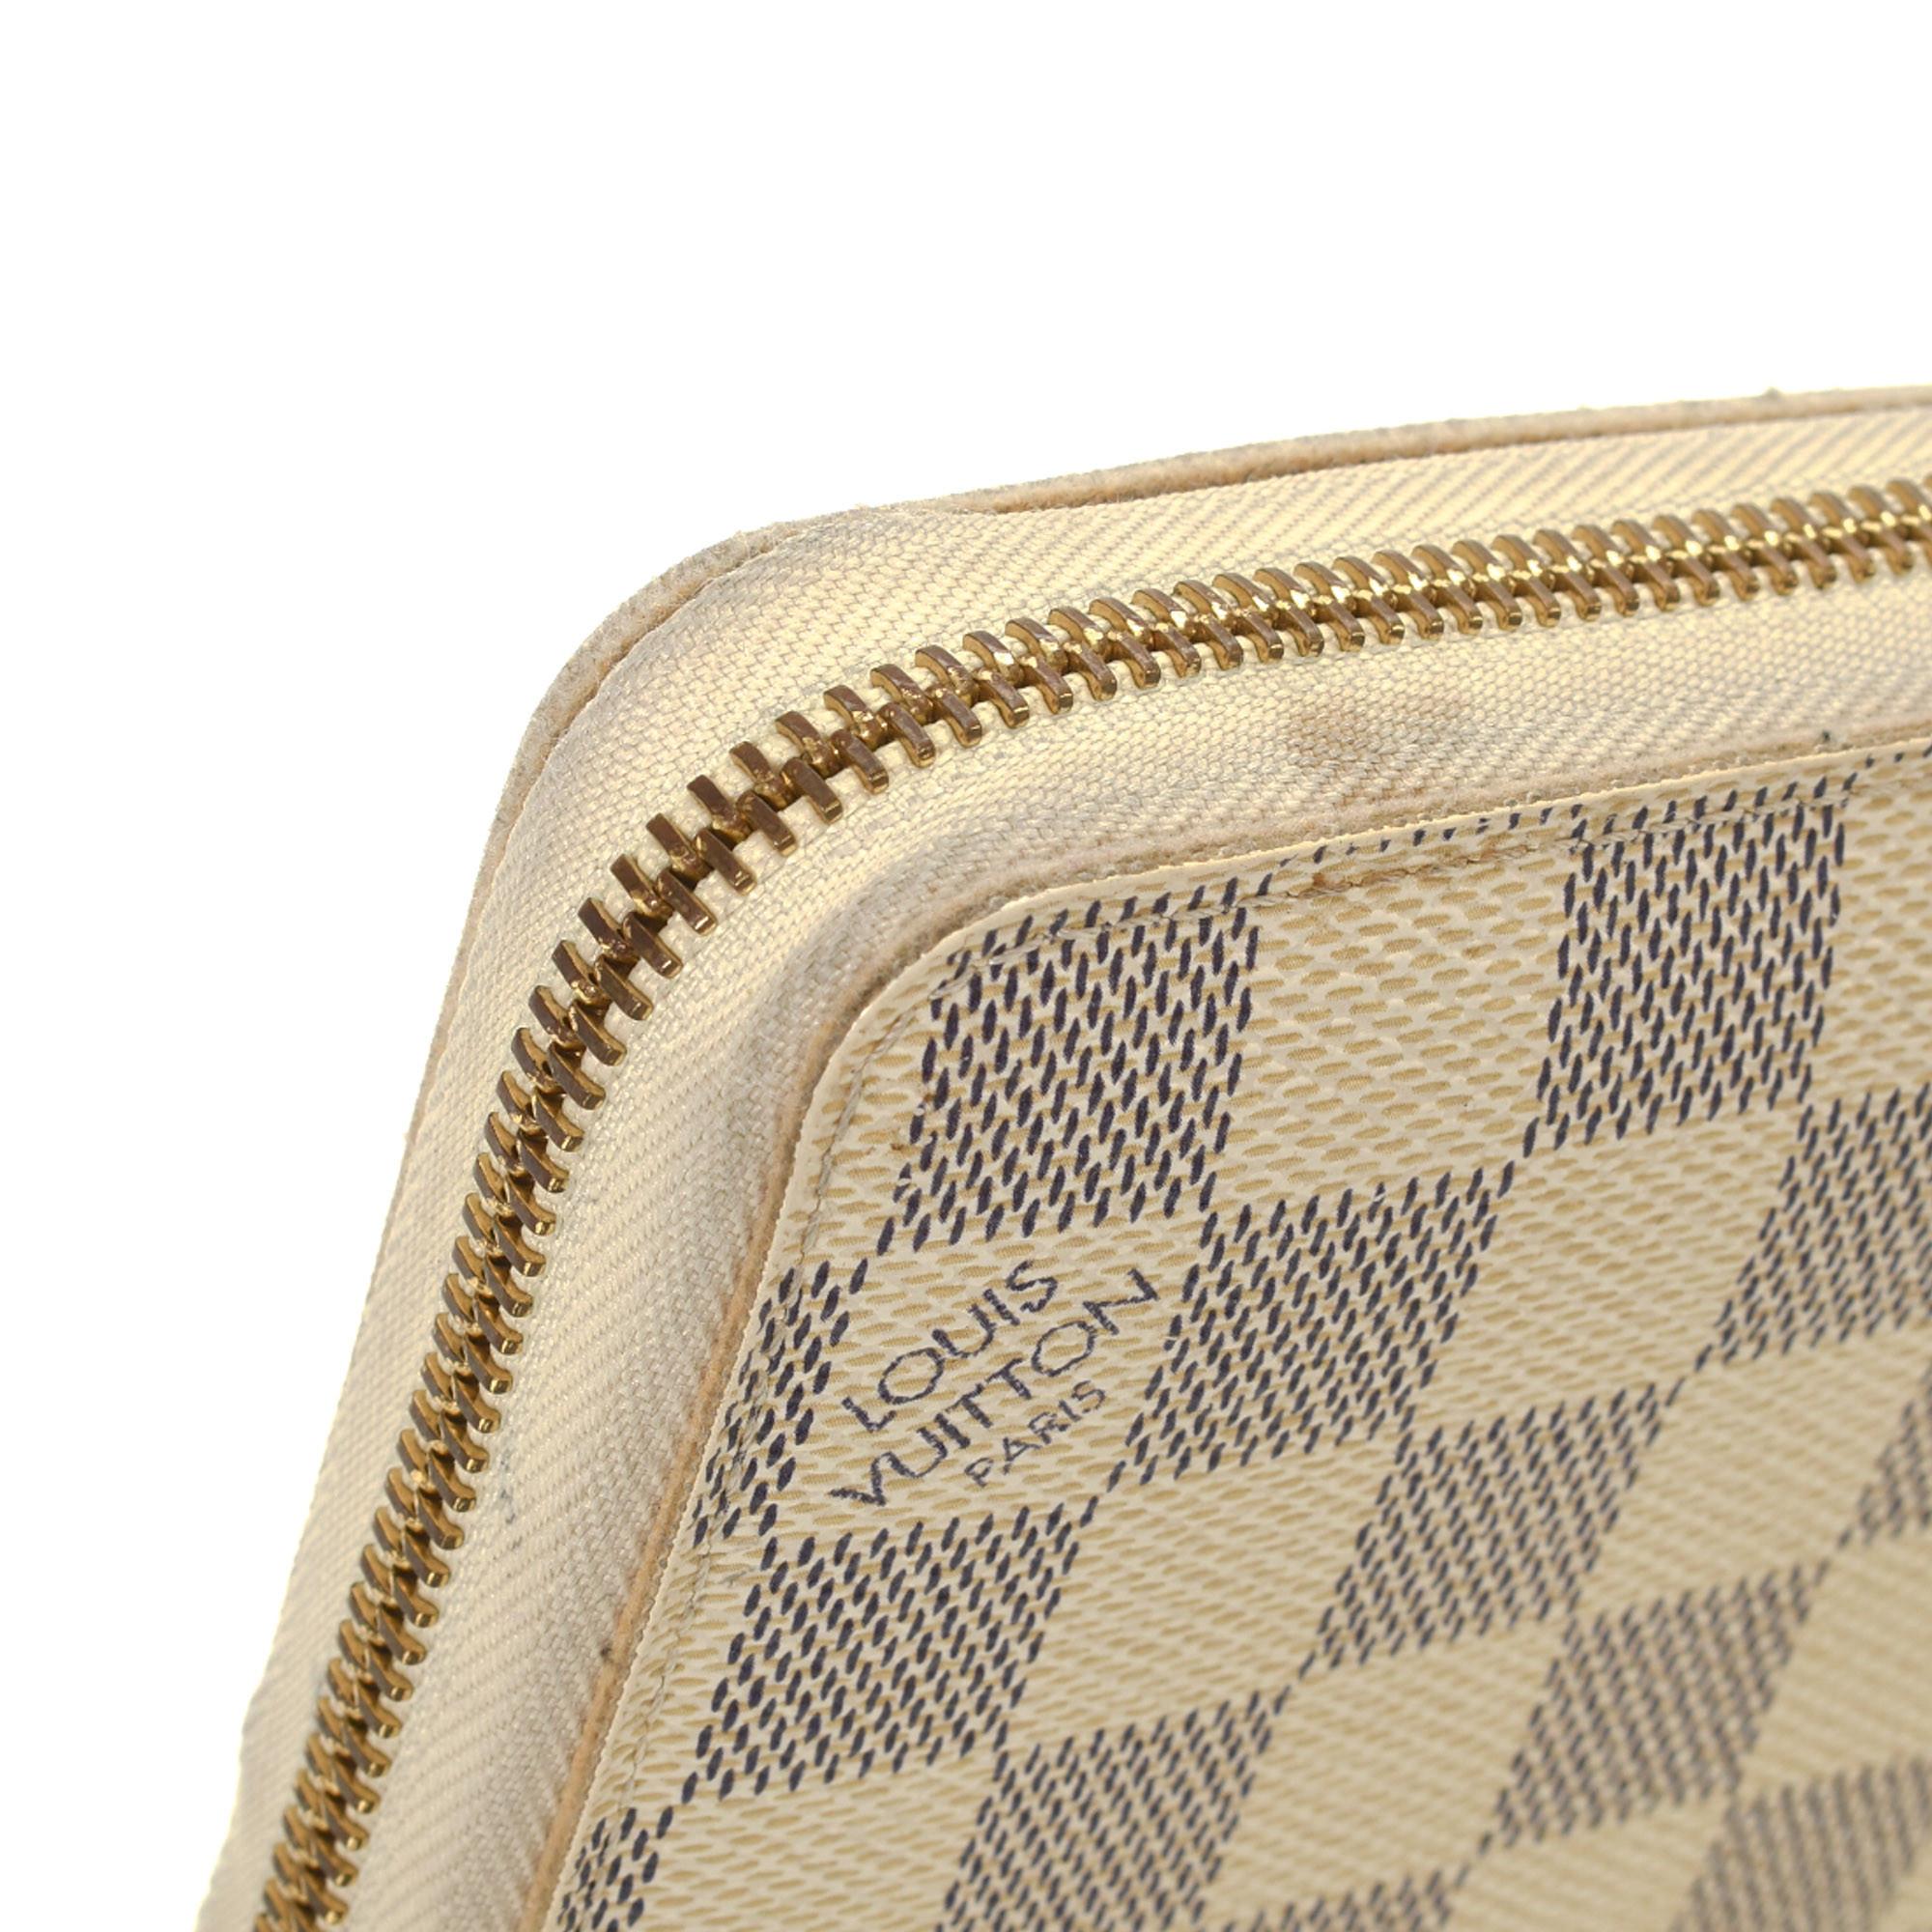 Louis Vuitton Damier Azur Canvas Leather Zippy Wallet In Good Condition For Sale In Irvine, CA